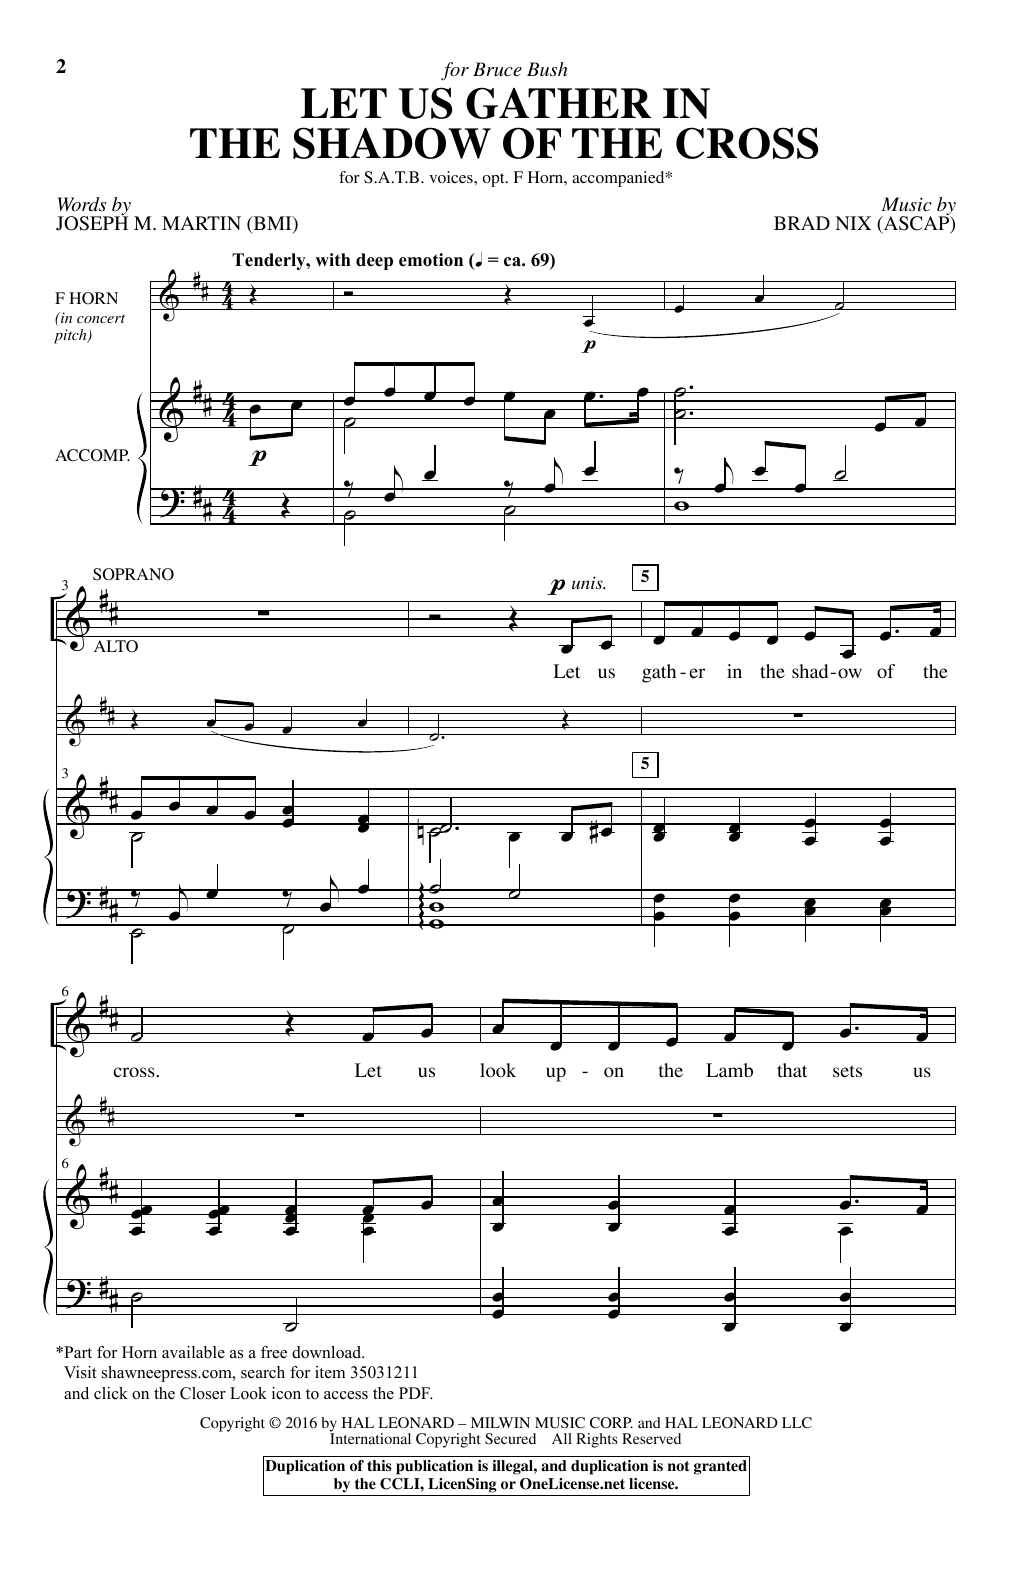 Download Brad Nix Let Us Gather In The Shadow Of The Cros Sheet Music